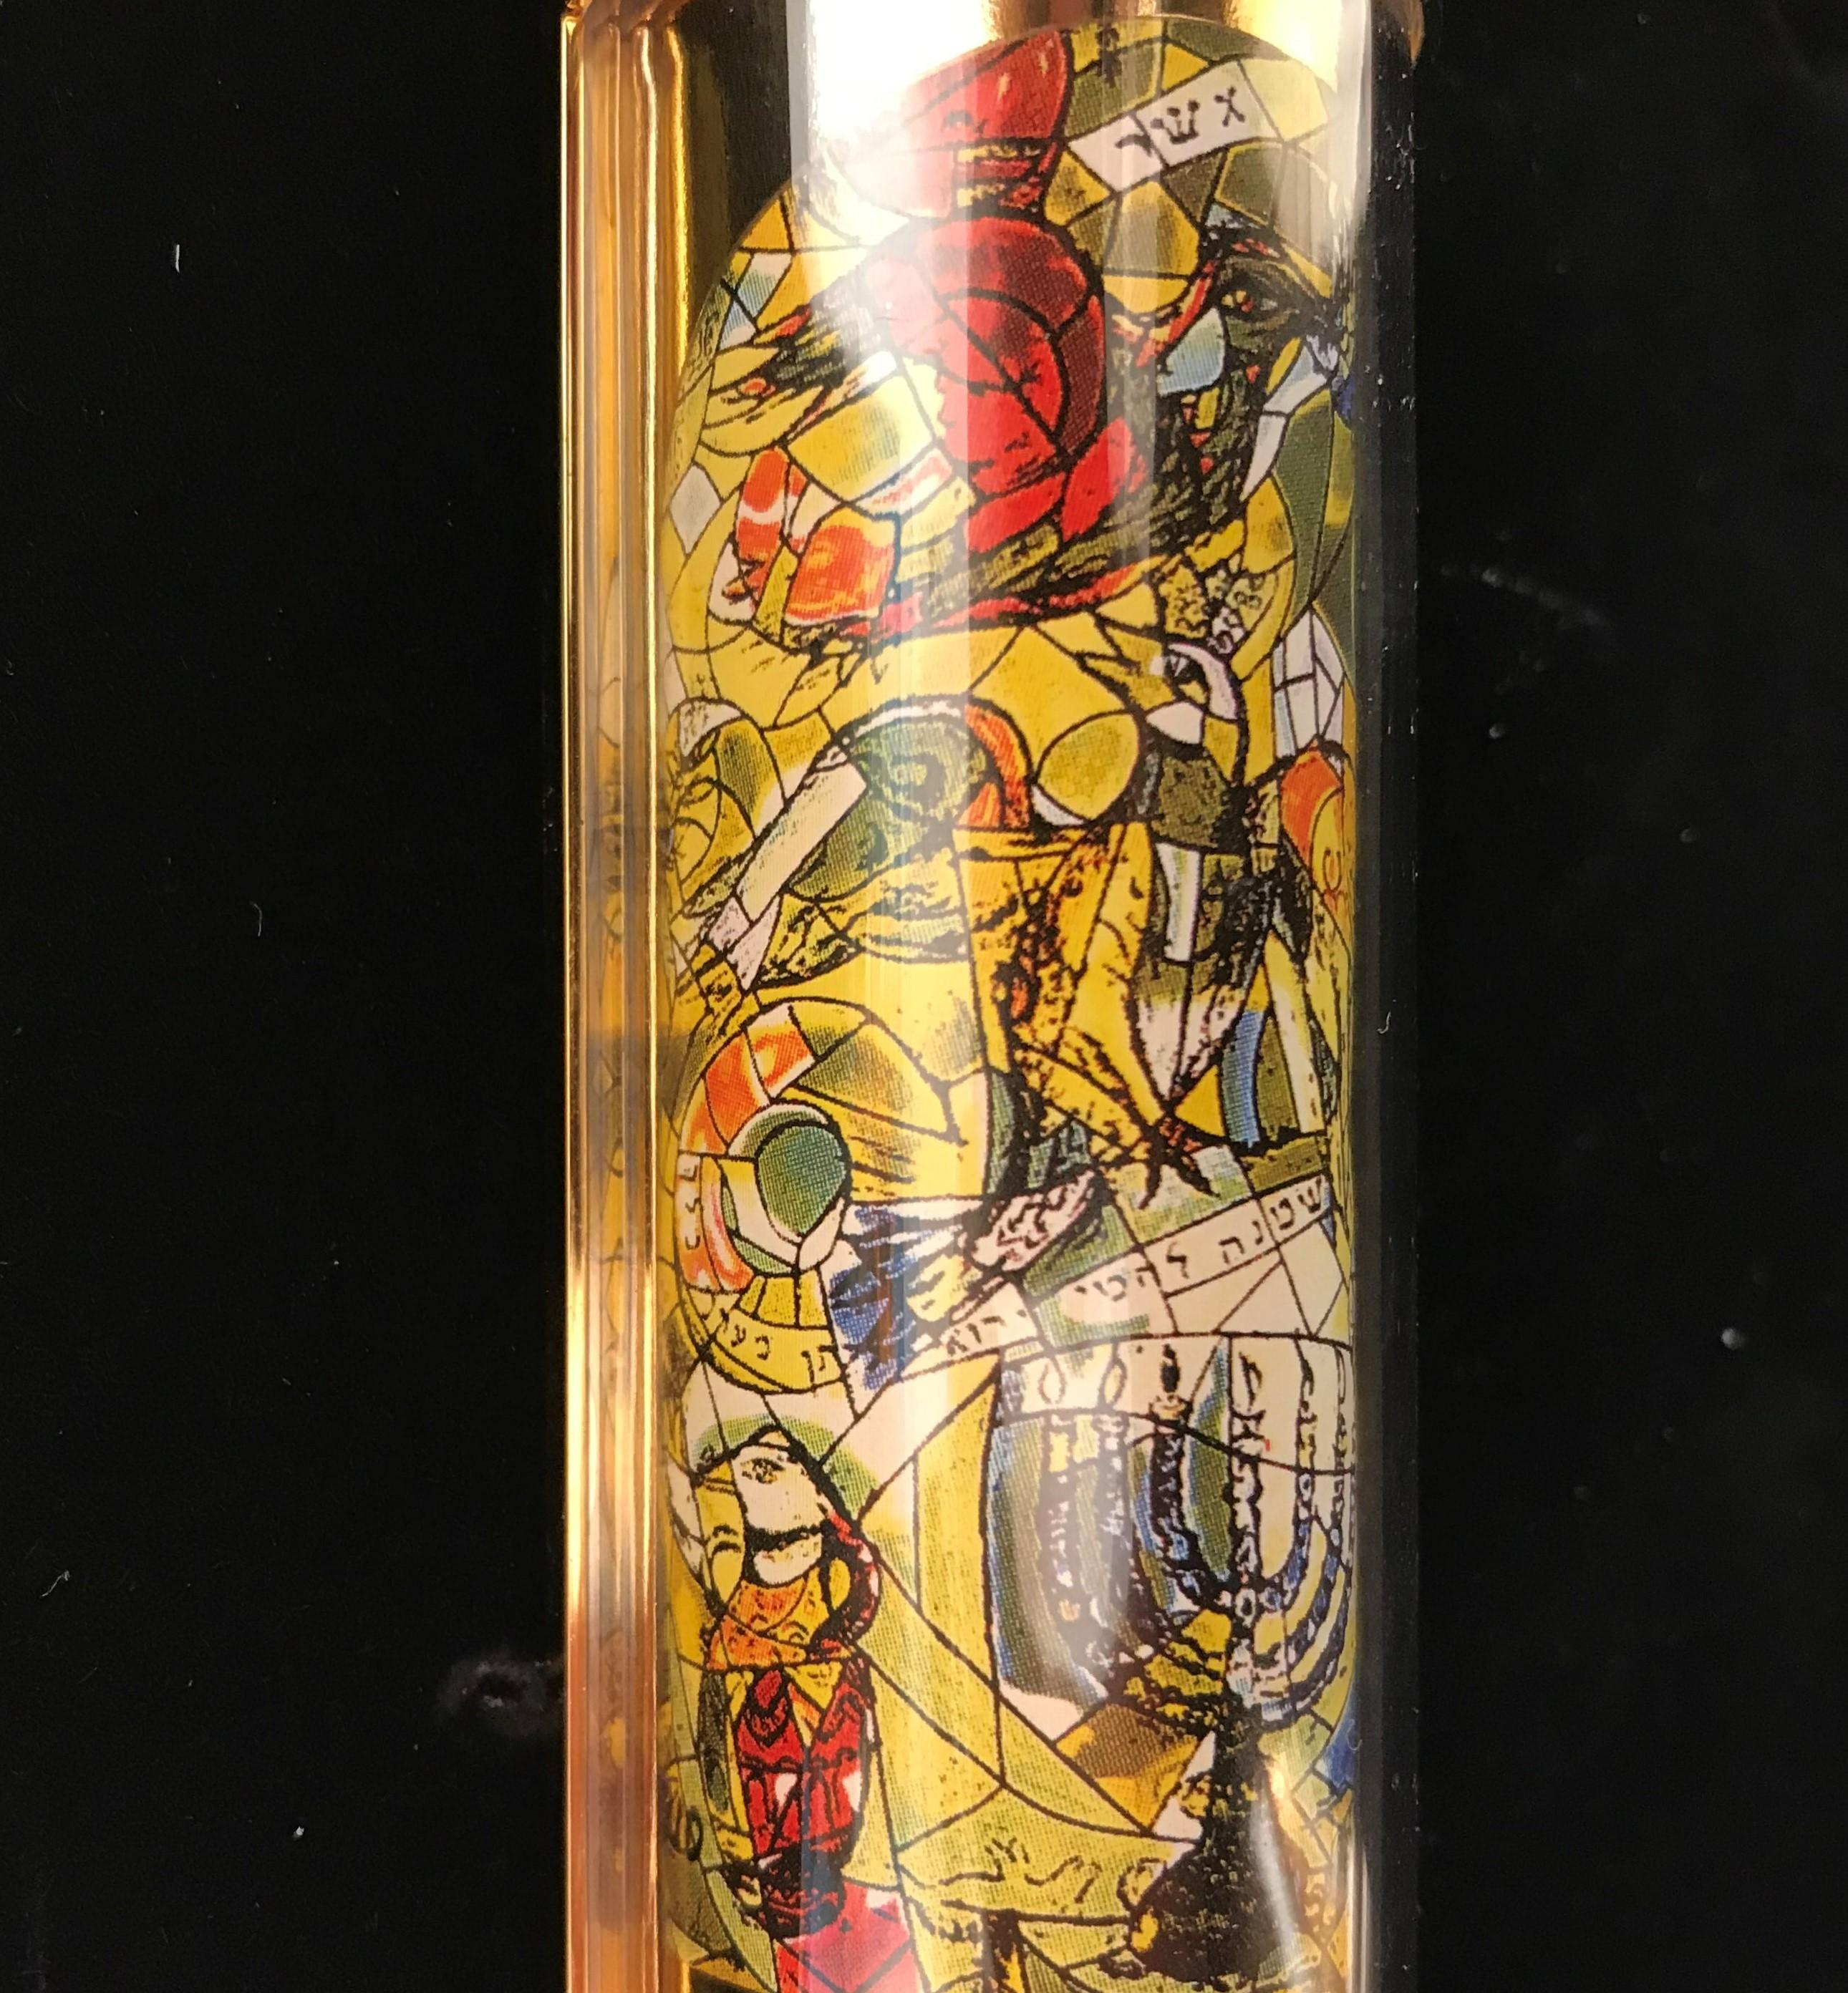 The Chagall mezuzah collection is a limited edition art project celebrating the art of one of the most iconic Jewish artist in history. This edition, consists of 1,800 sets of 12 Mezuzah casings, one for each of the tribes of Israel.
Designed by